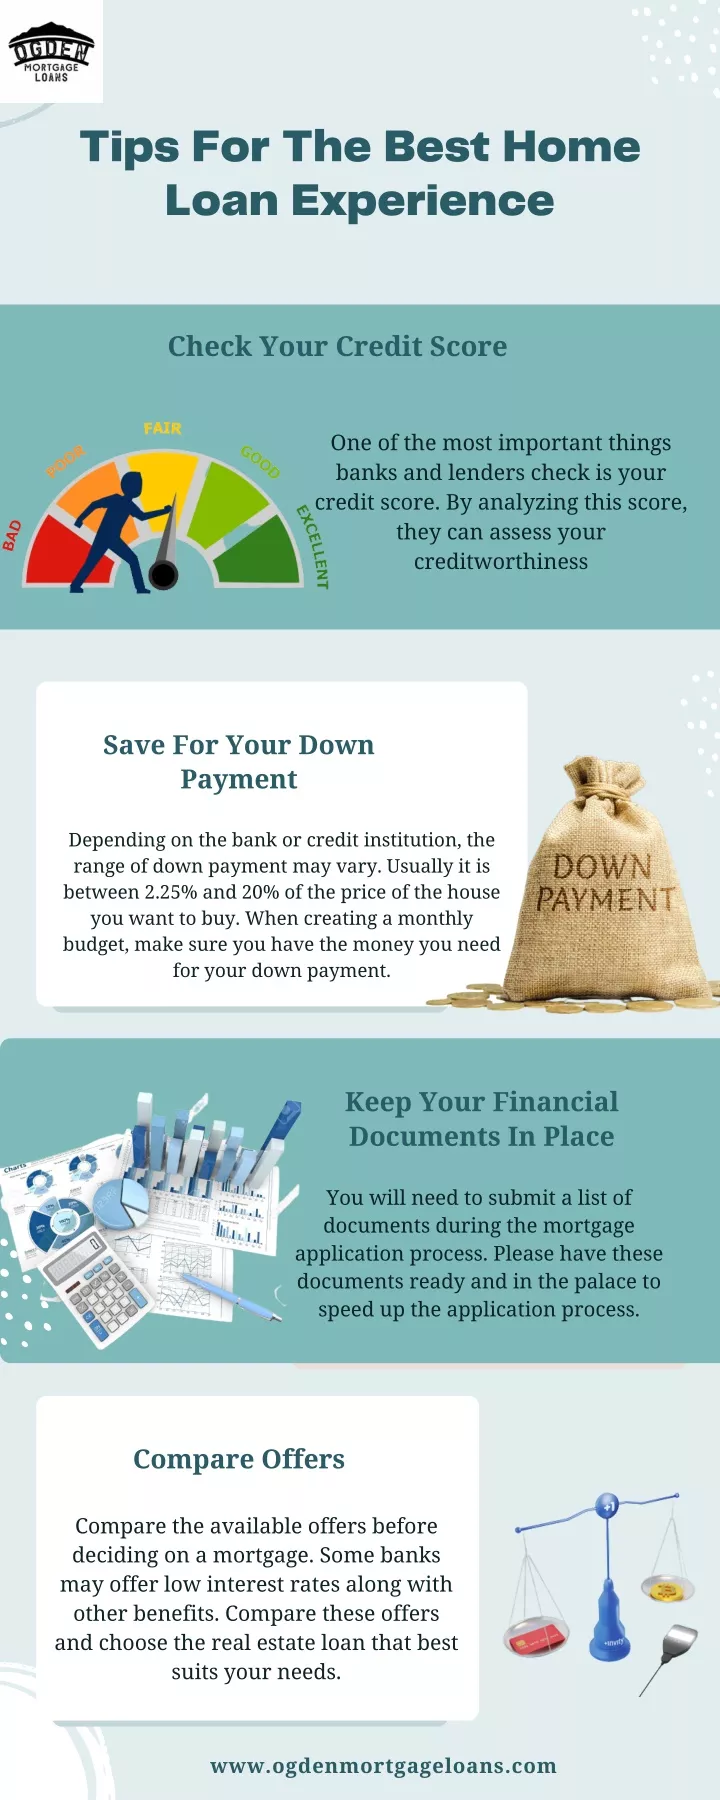 tips for the best home loan experience